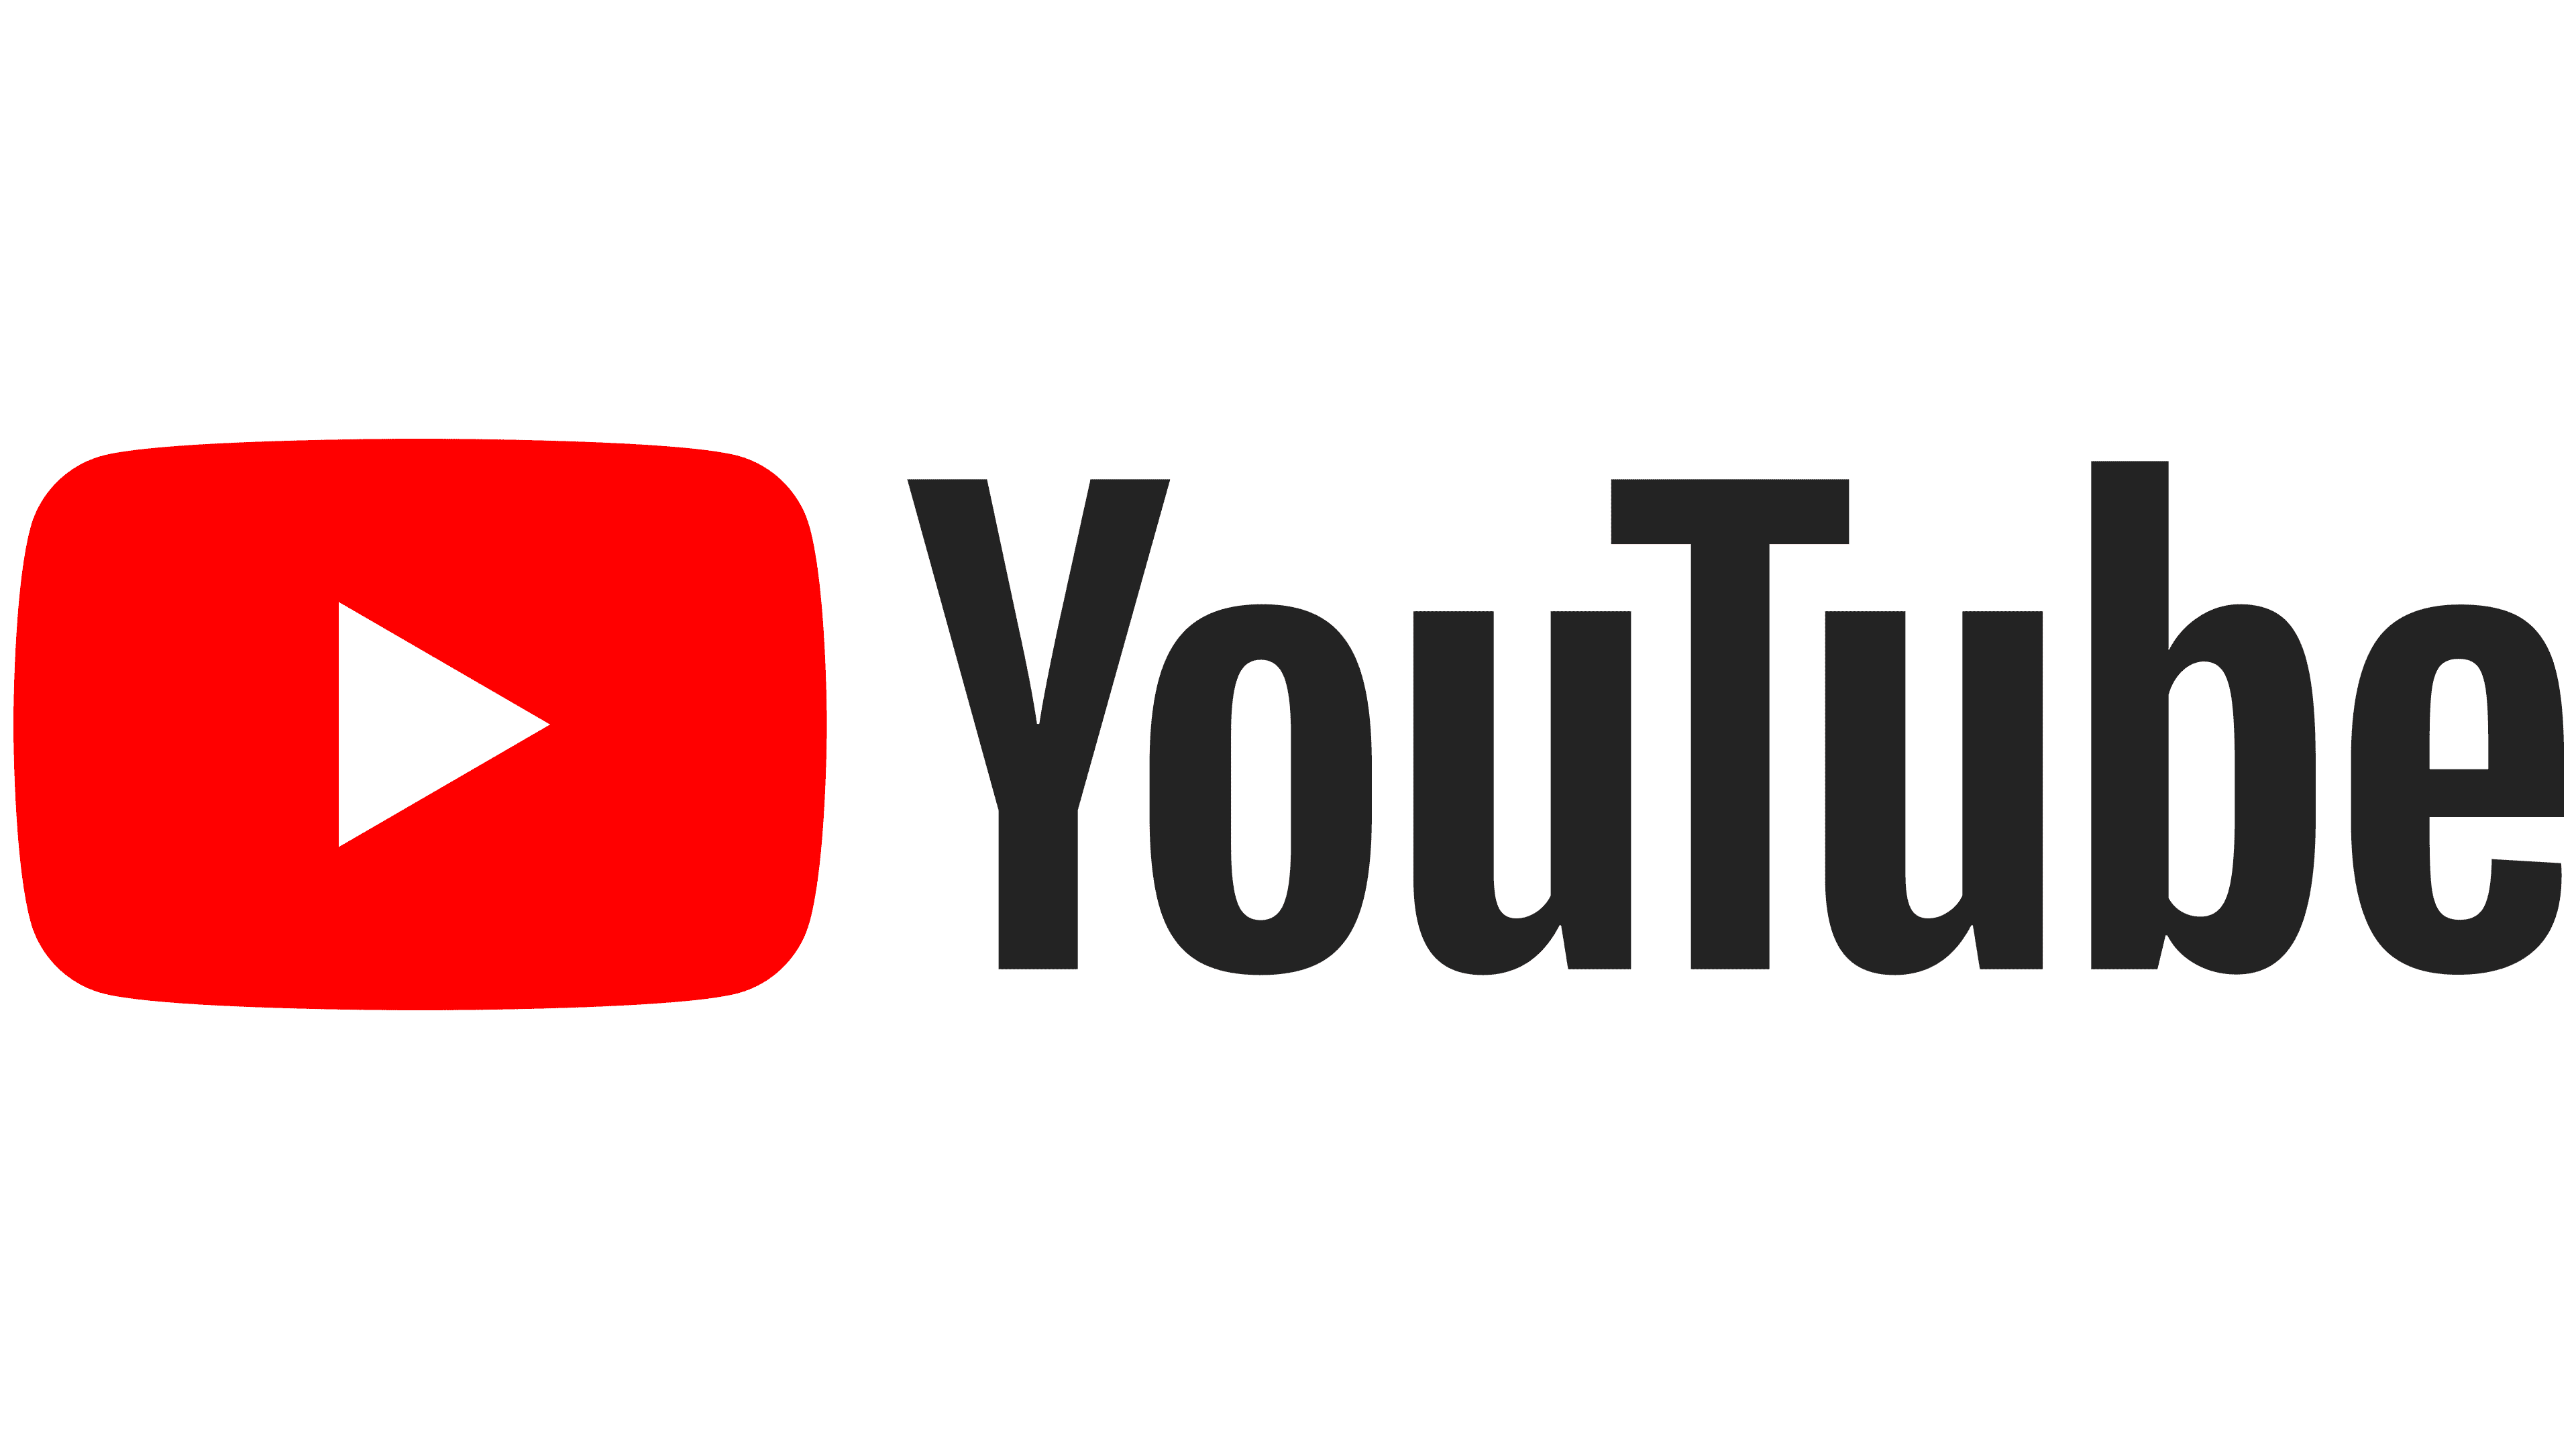 YouTube Logo | The most famous brands and company logos in the world